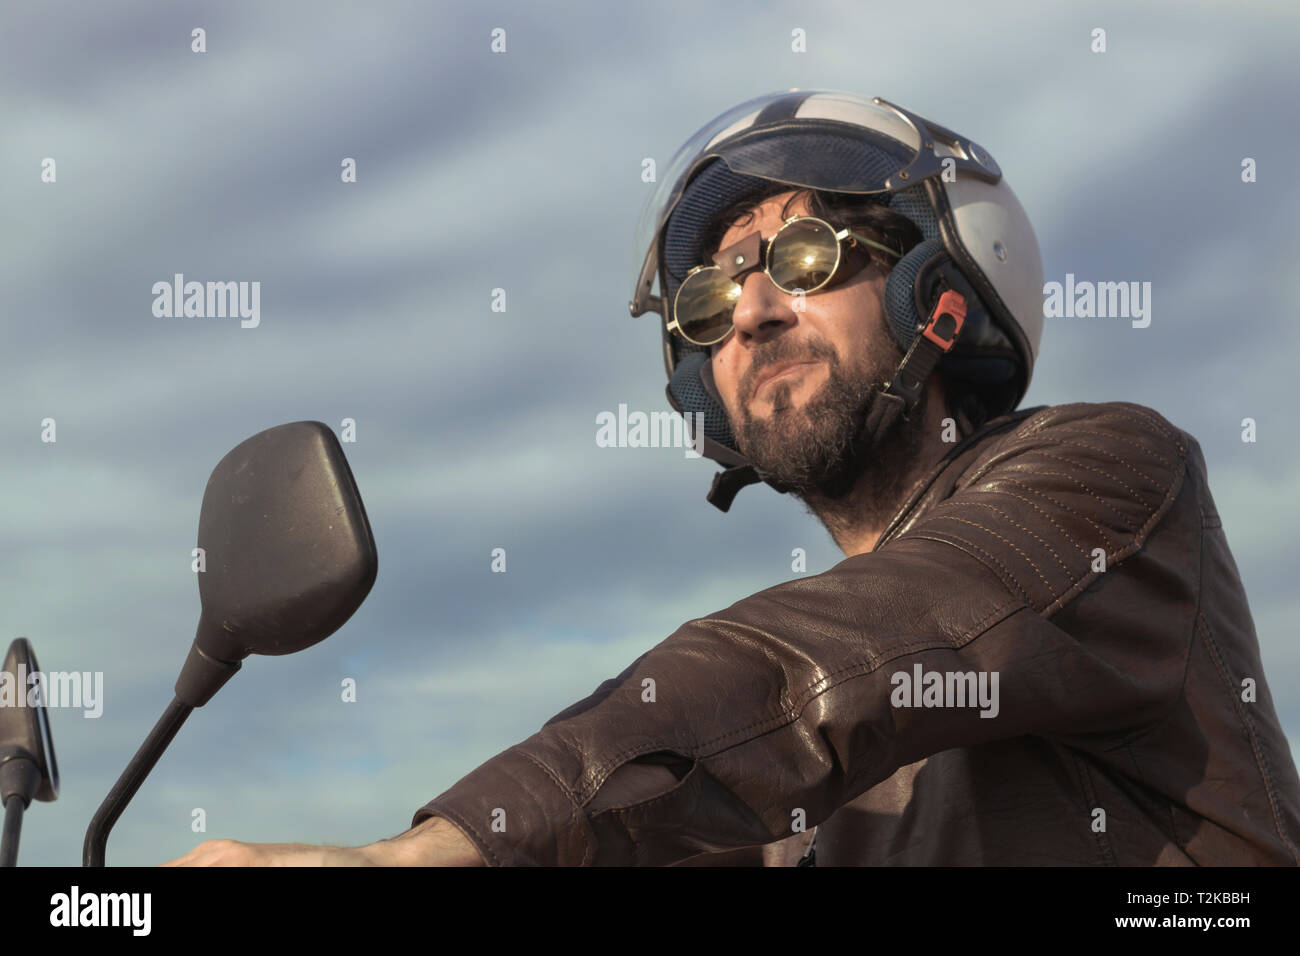 Brunette man with brown leather jacket, helmet and glasses on a retro style motorbike Stock Photo